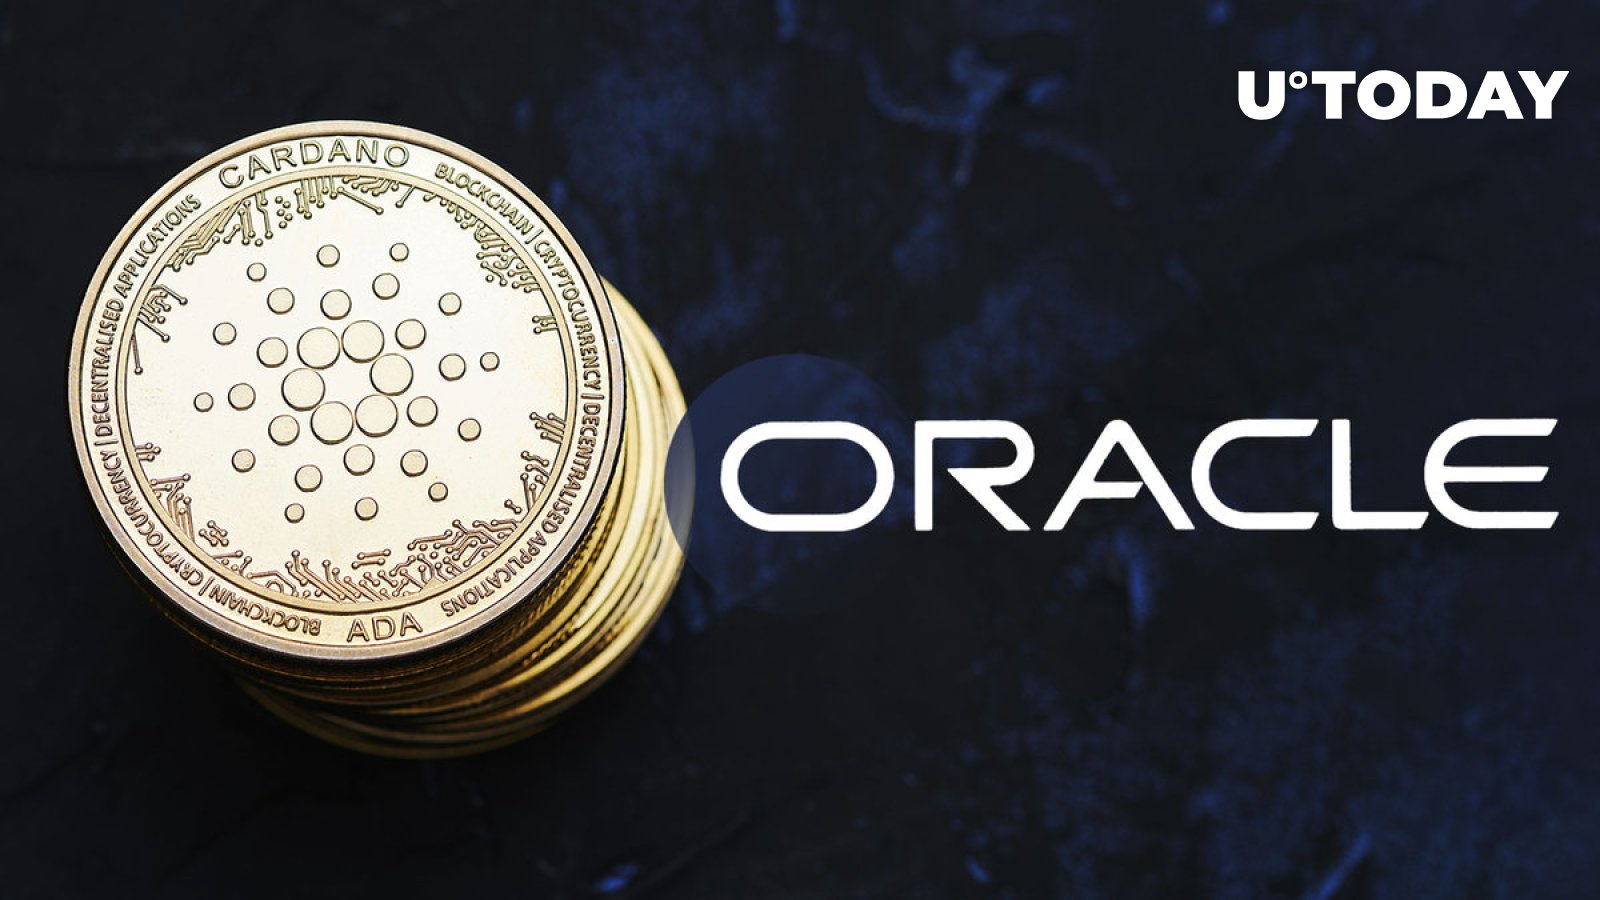 Cardano (ADA) Records Its First Oracle Integration Through Liqwid: Details